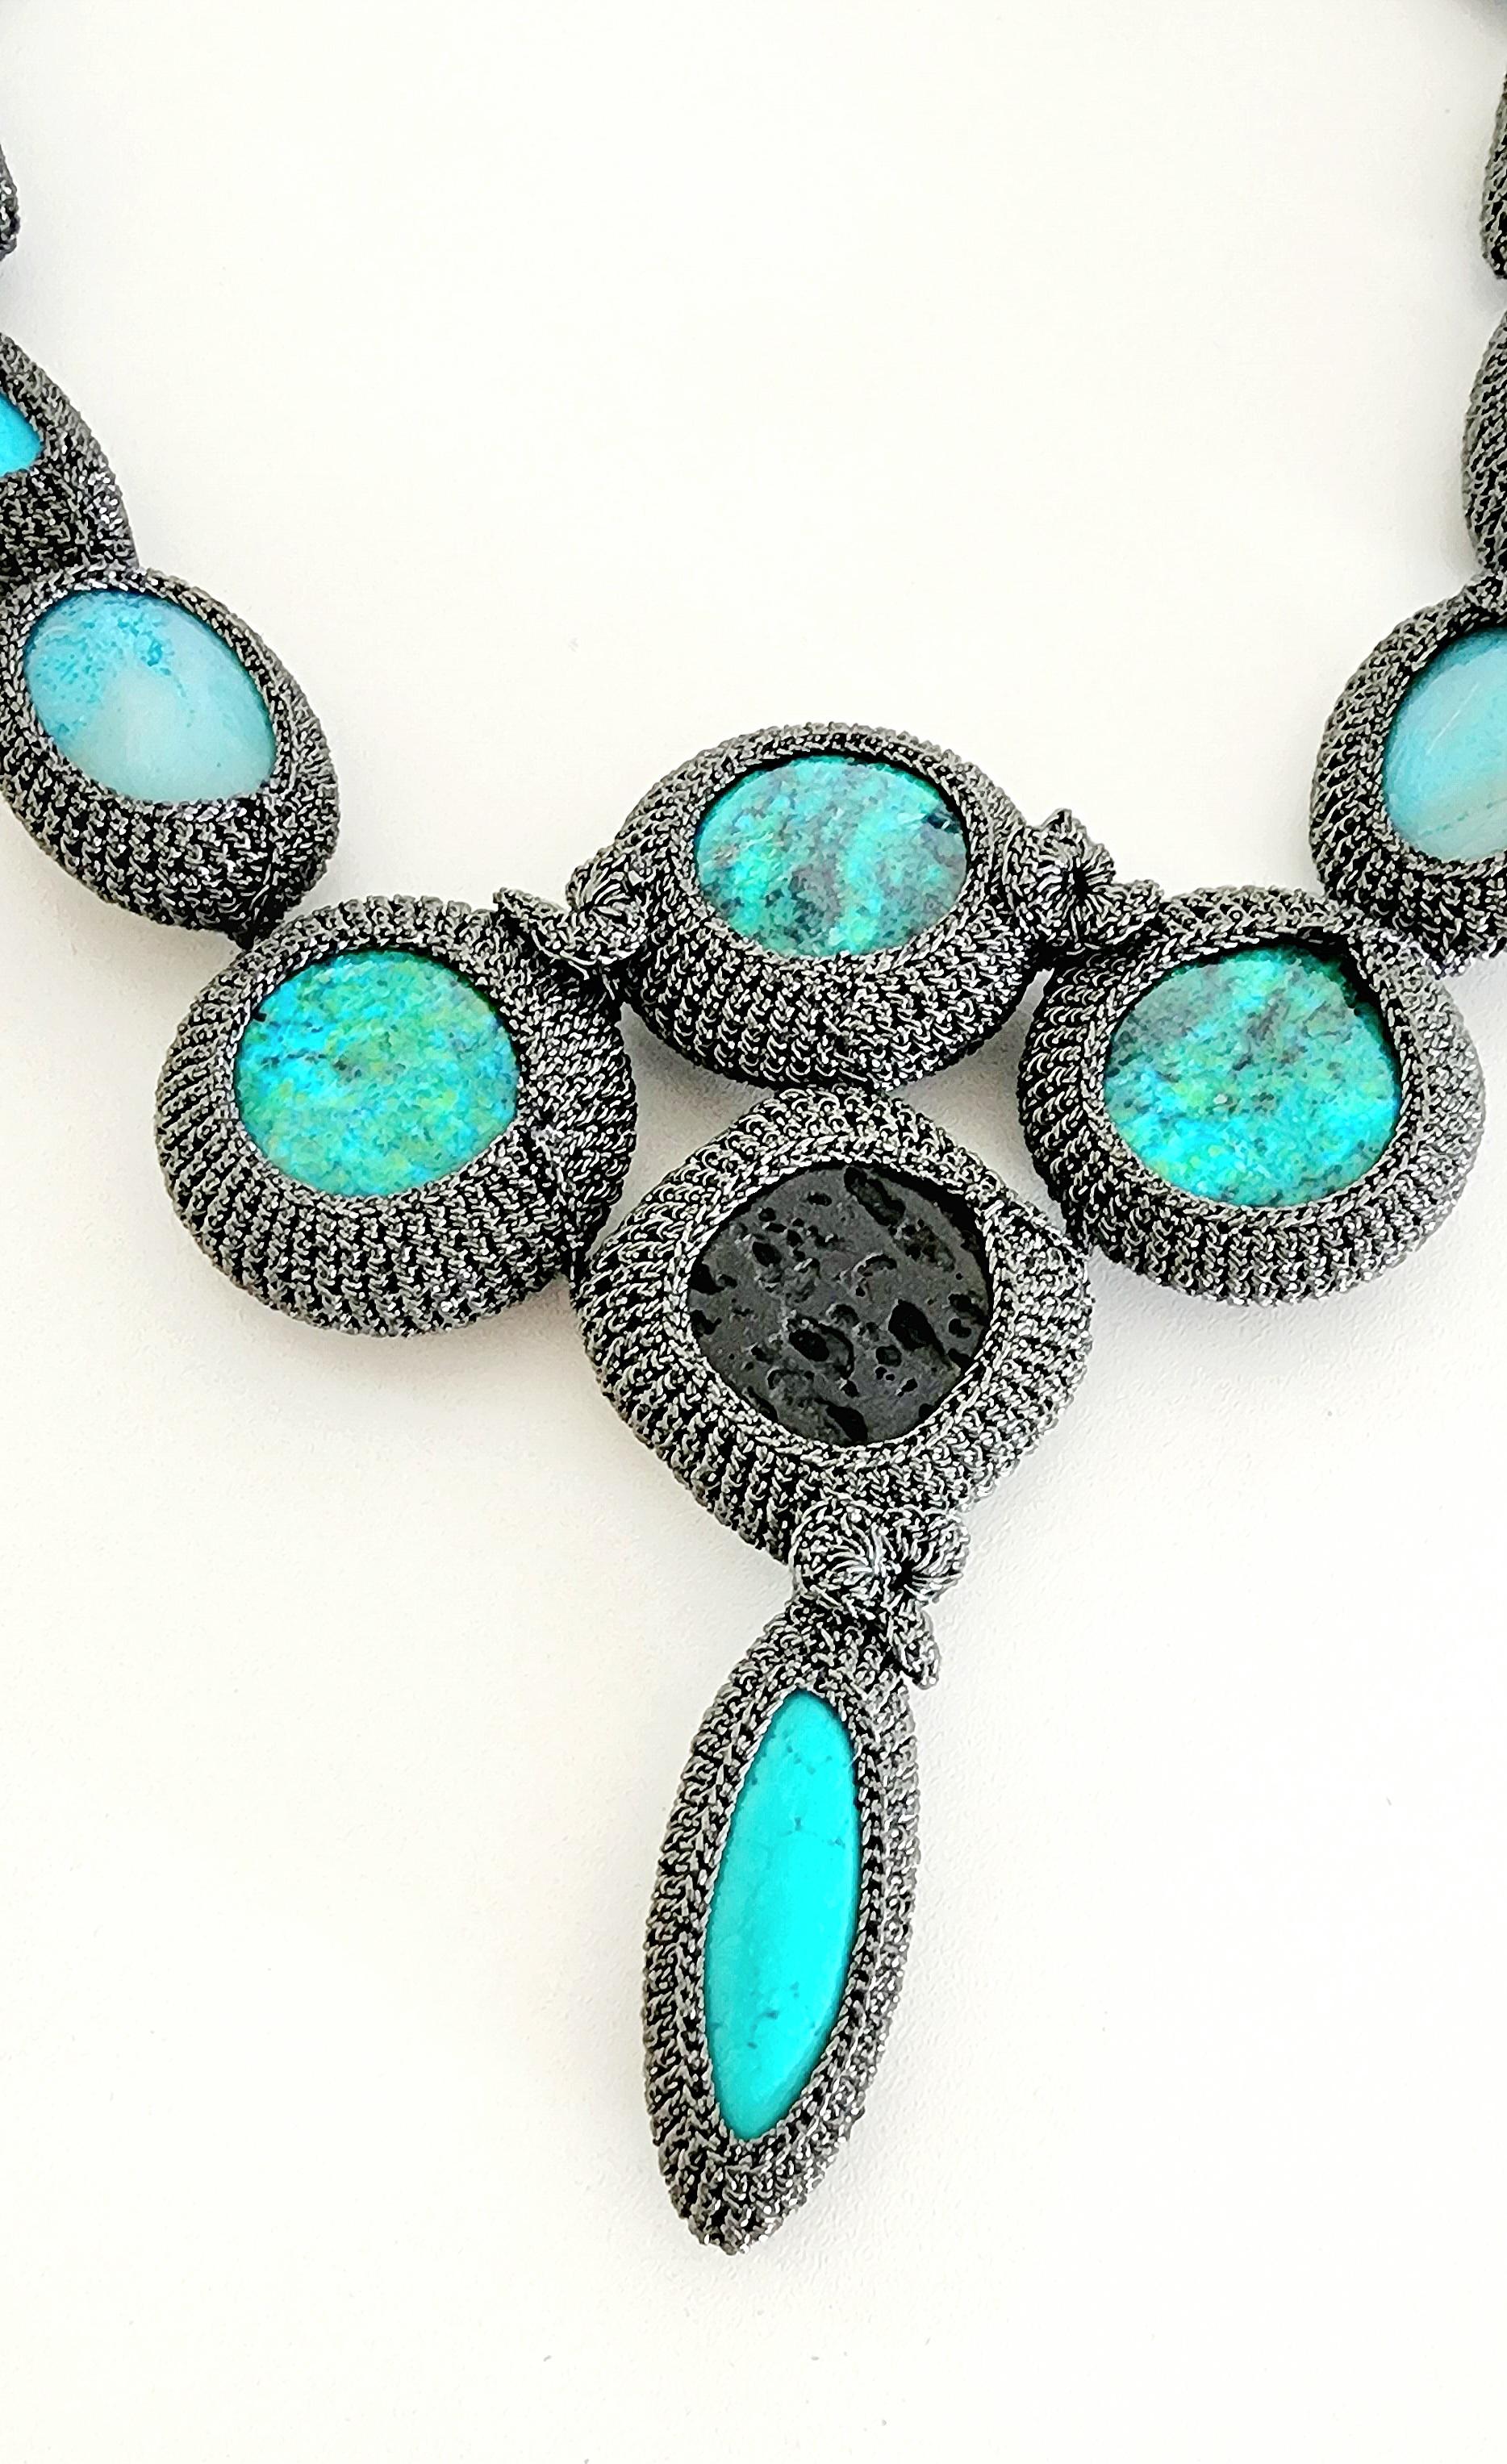 Beautiful, one of a kind statement necklace. Black Thread Crochet around various stones to create a unique, standout designer piece. Hand crochet meticulously which adds depth and creates a sparkly effect when worn. The Thread is a smooth passing